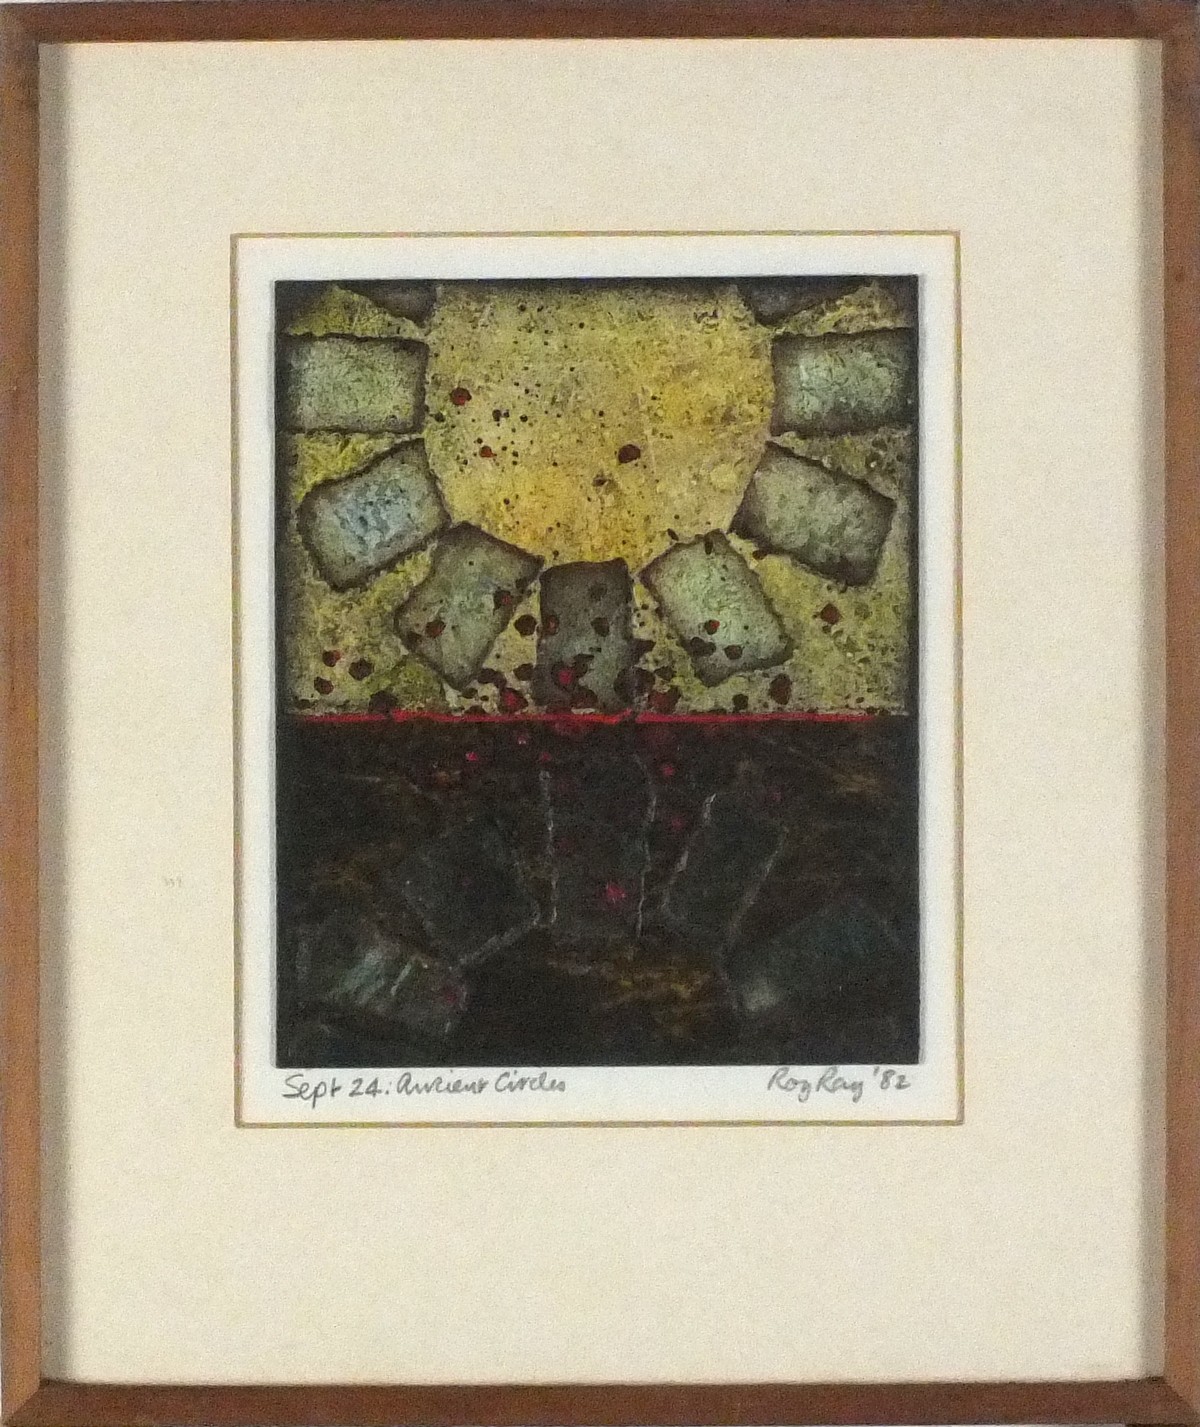 * Roy RAY (b.1936), Mixed media & collage on board, 'Ancient Circles', Inscribed, signed & dated